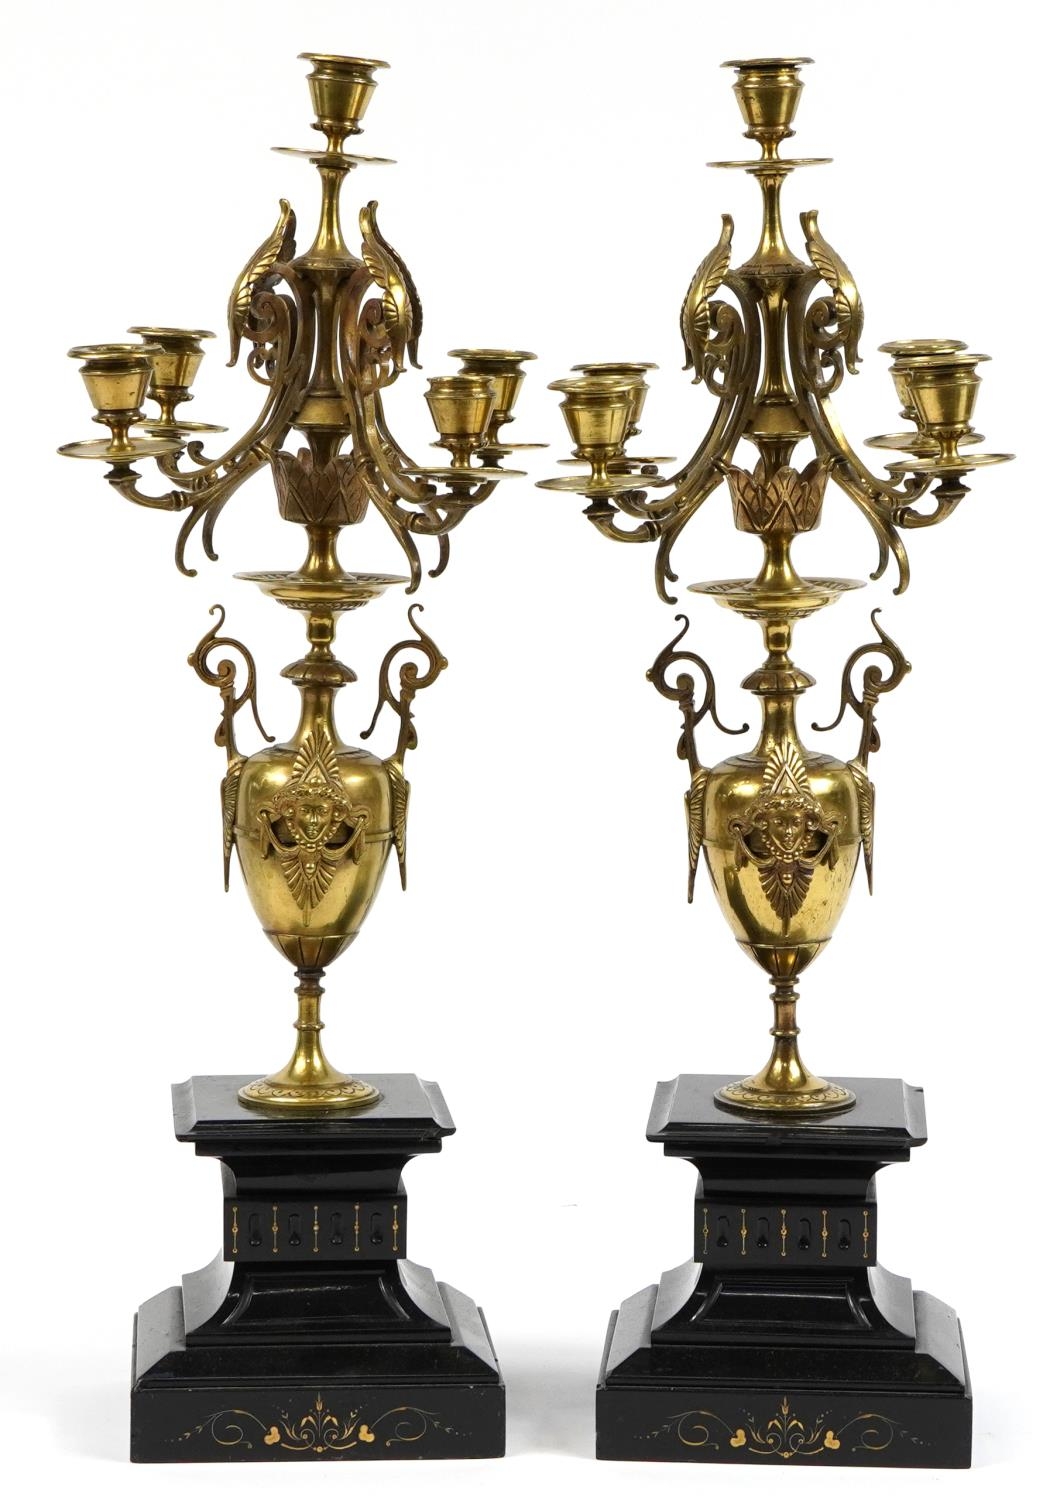 Pair of 19th century bronzed five branch candelabras raised of black slate bases, each 62cm high